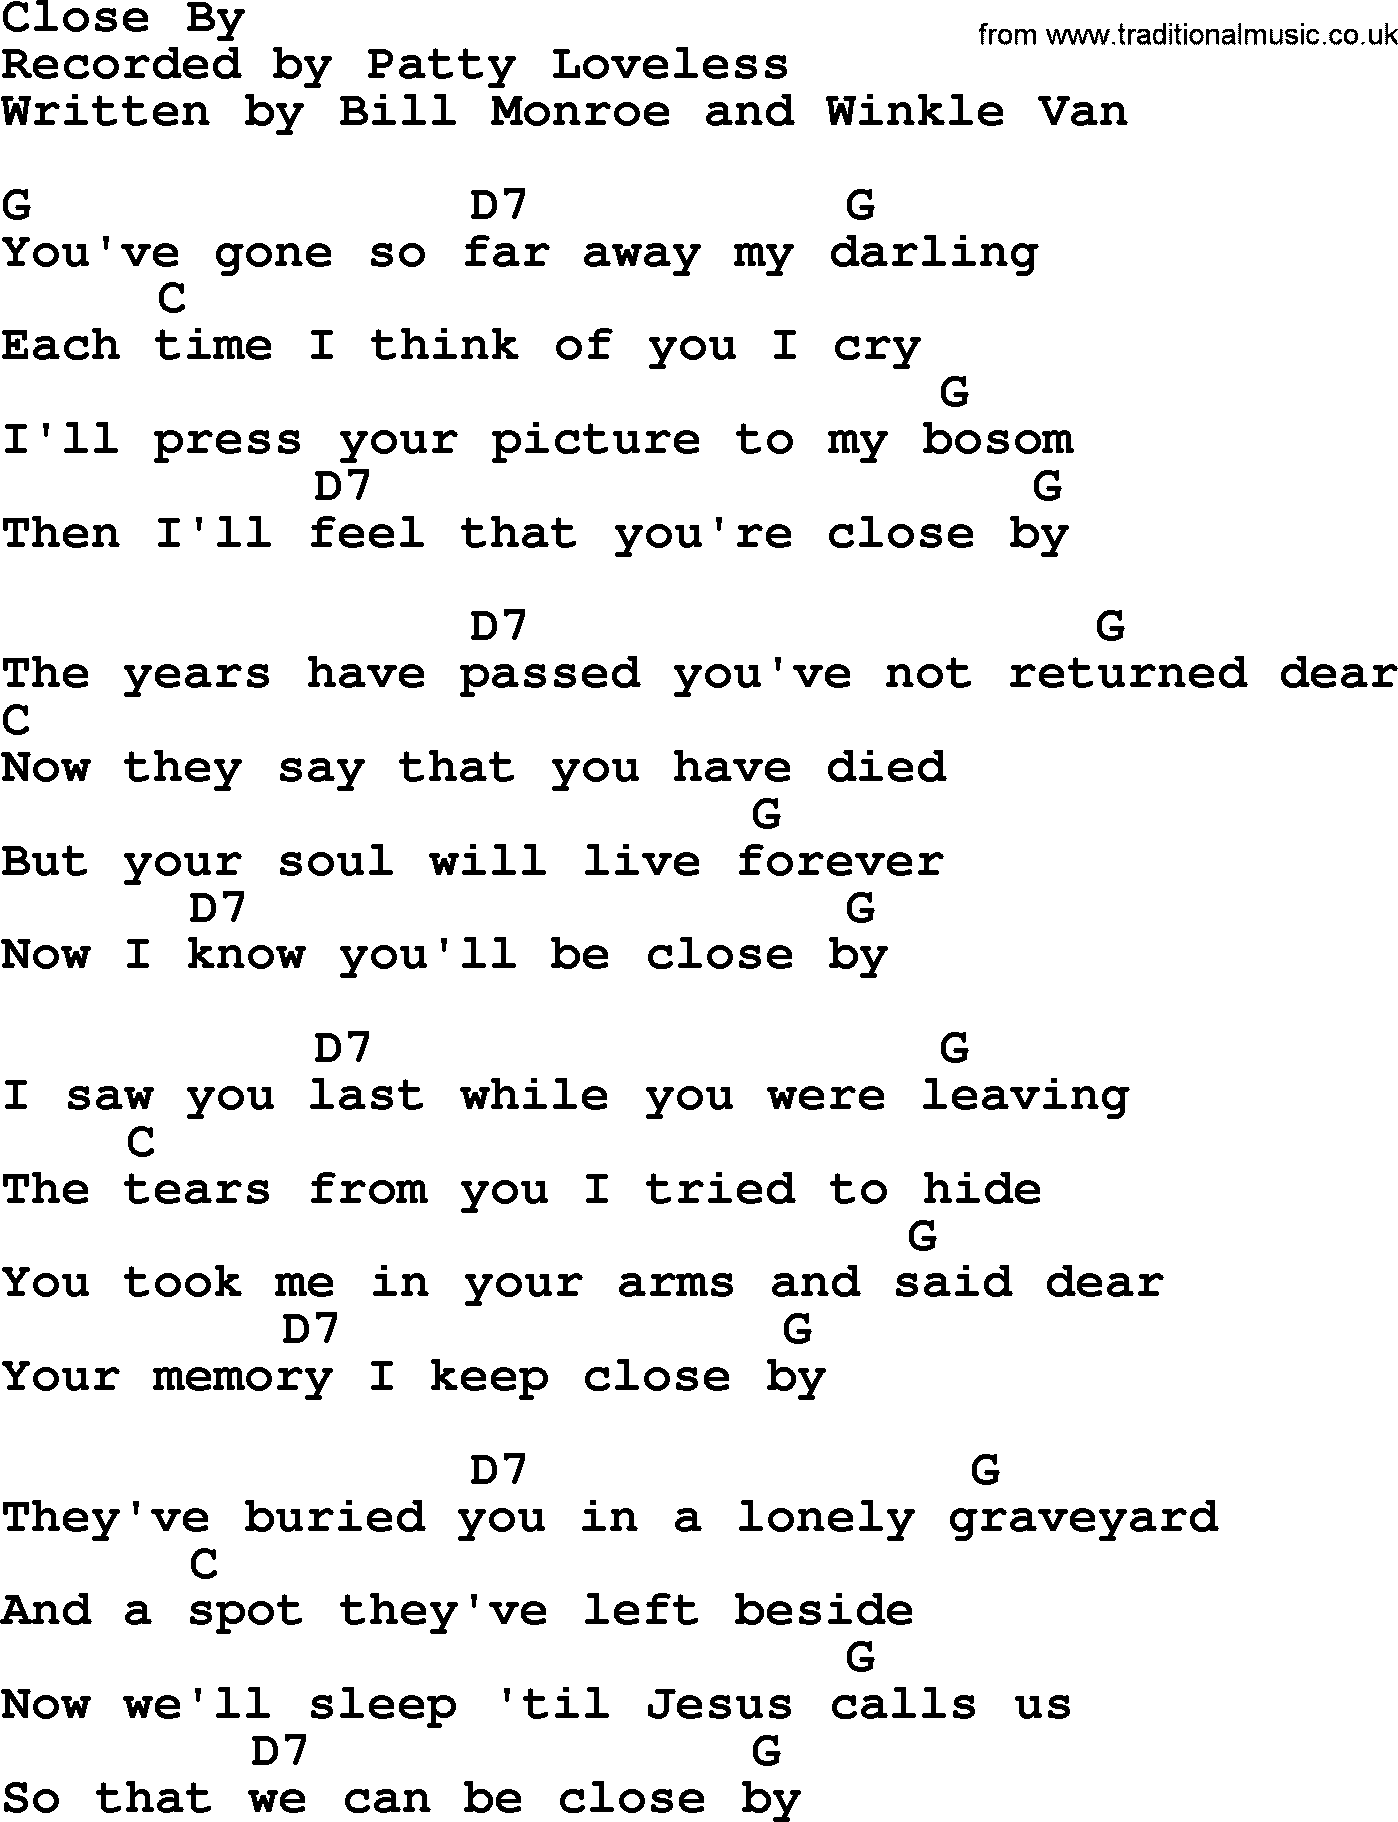 Bluegrass song: Close By, lyrics and chords